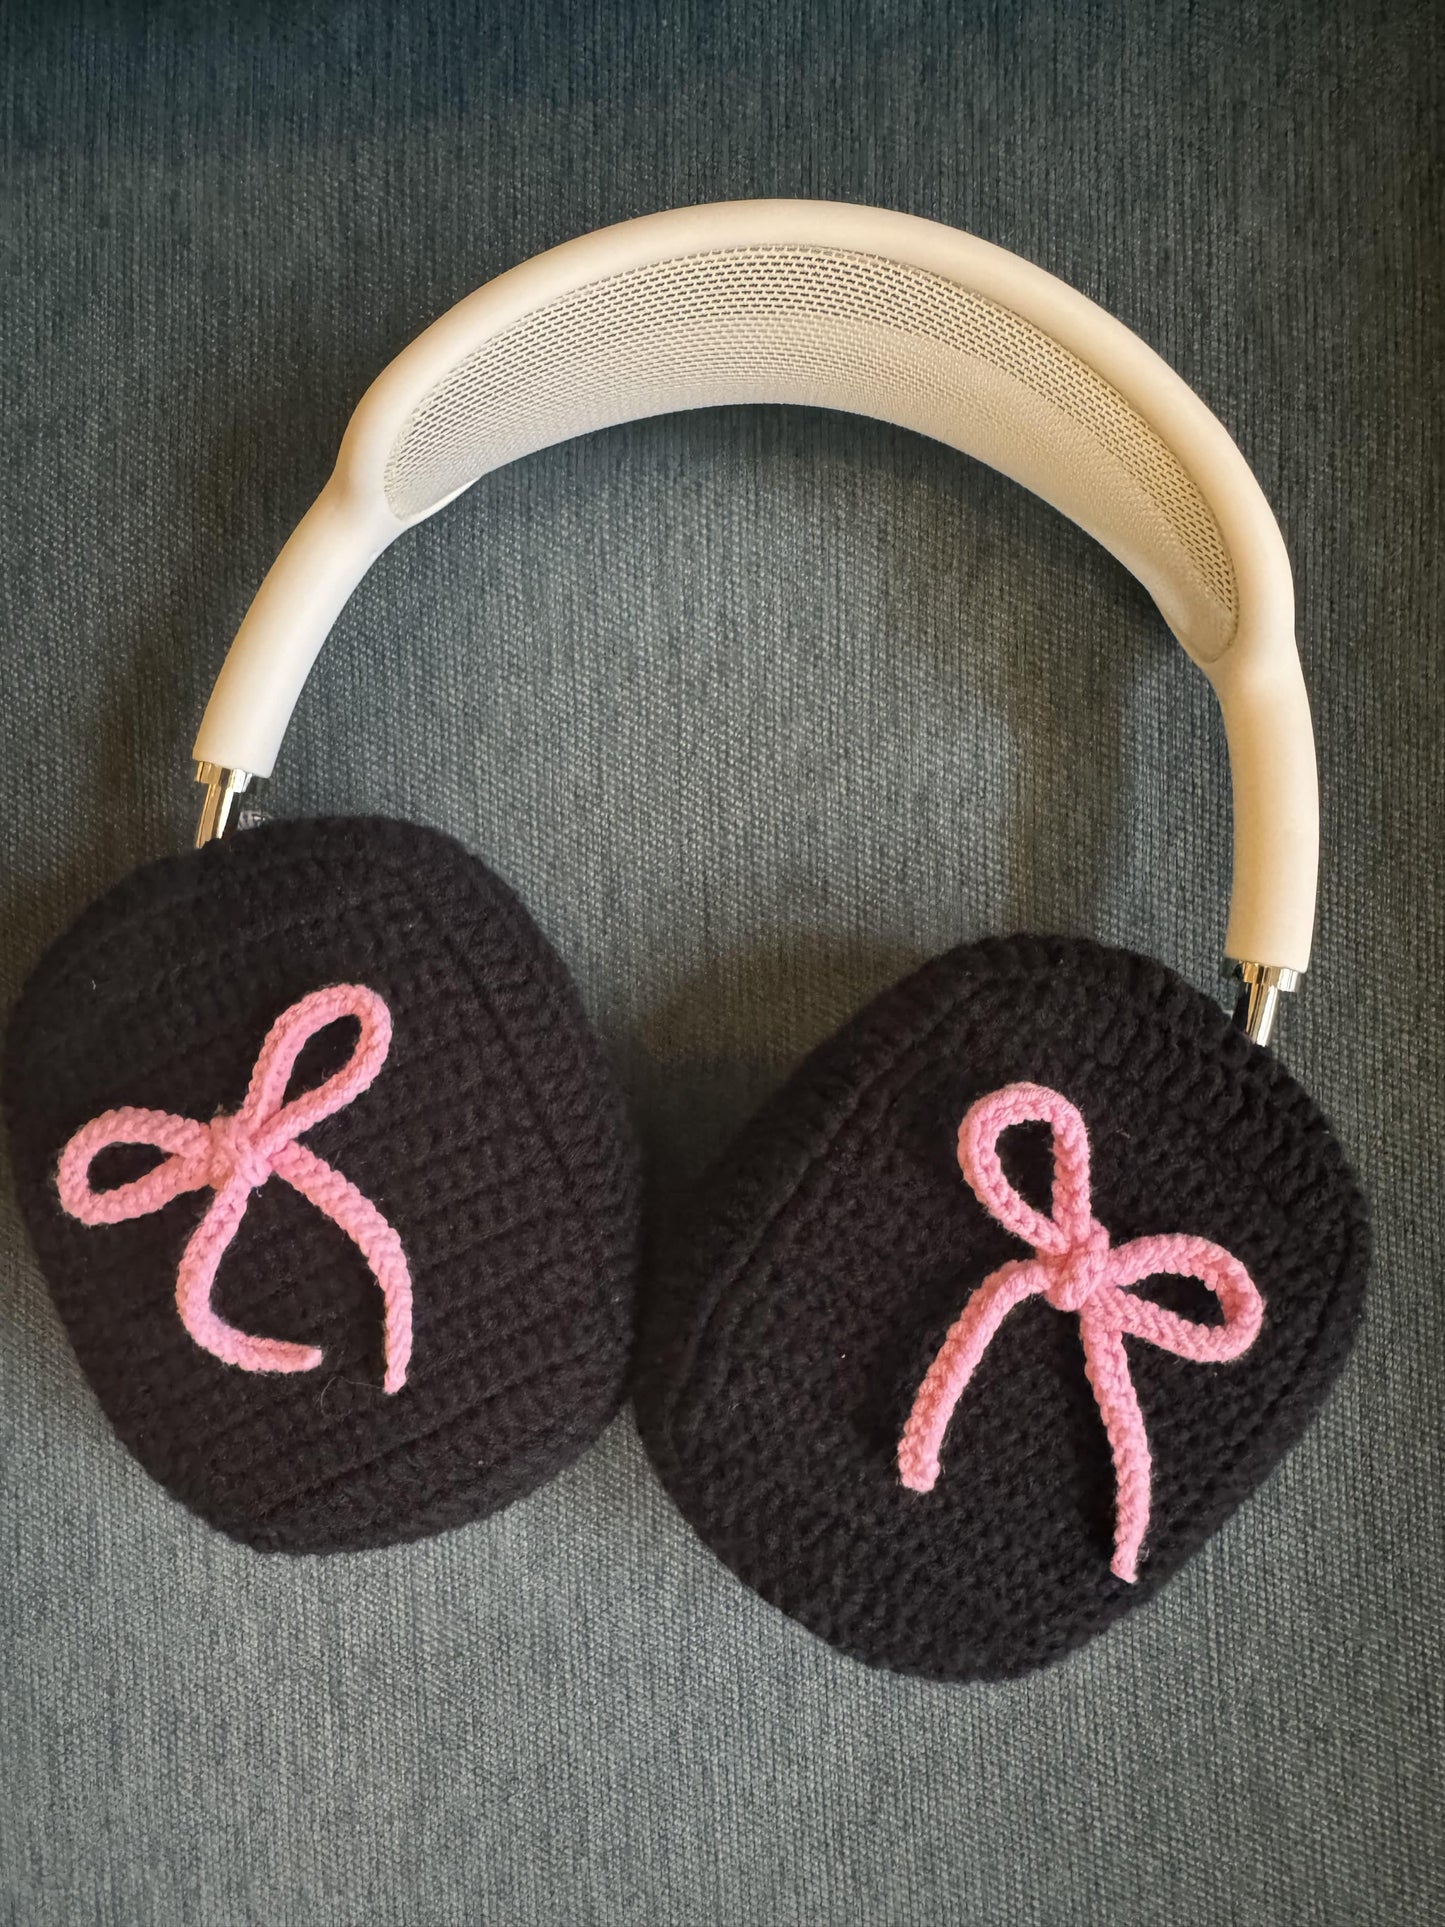 Crochet Bow AirPods Max Cases Sony XM5 Cases